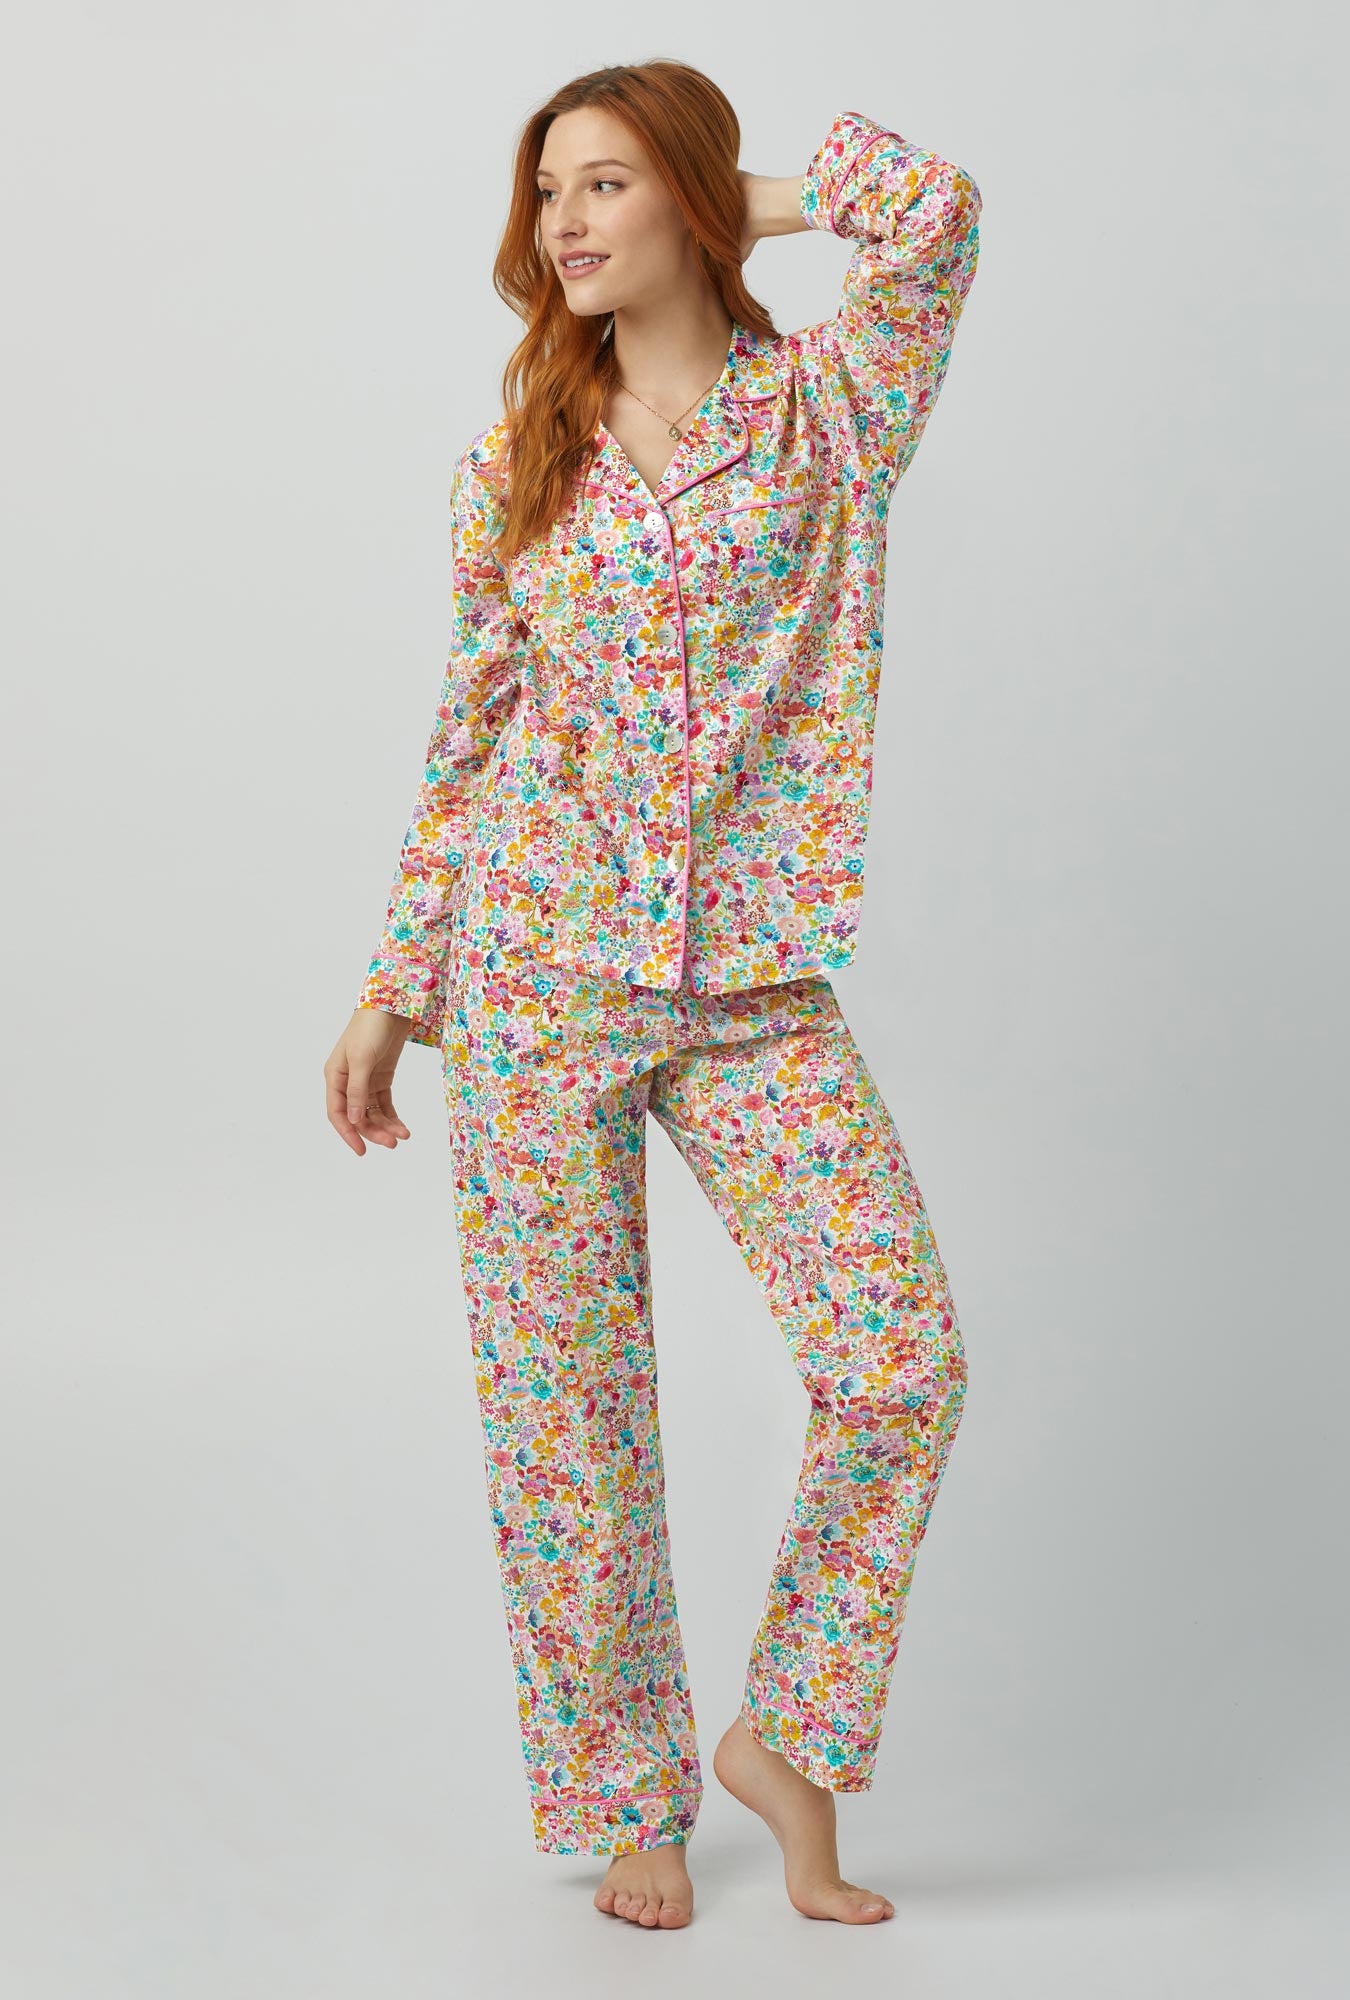 A lady wearing multi color Long Sleeve Classic Woven Cotton PJ Set with Classic Meadow print